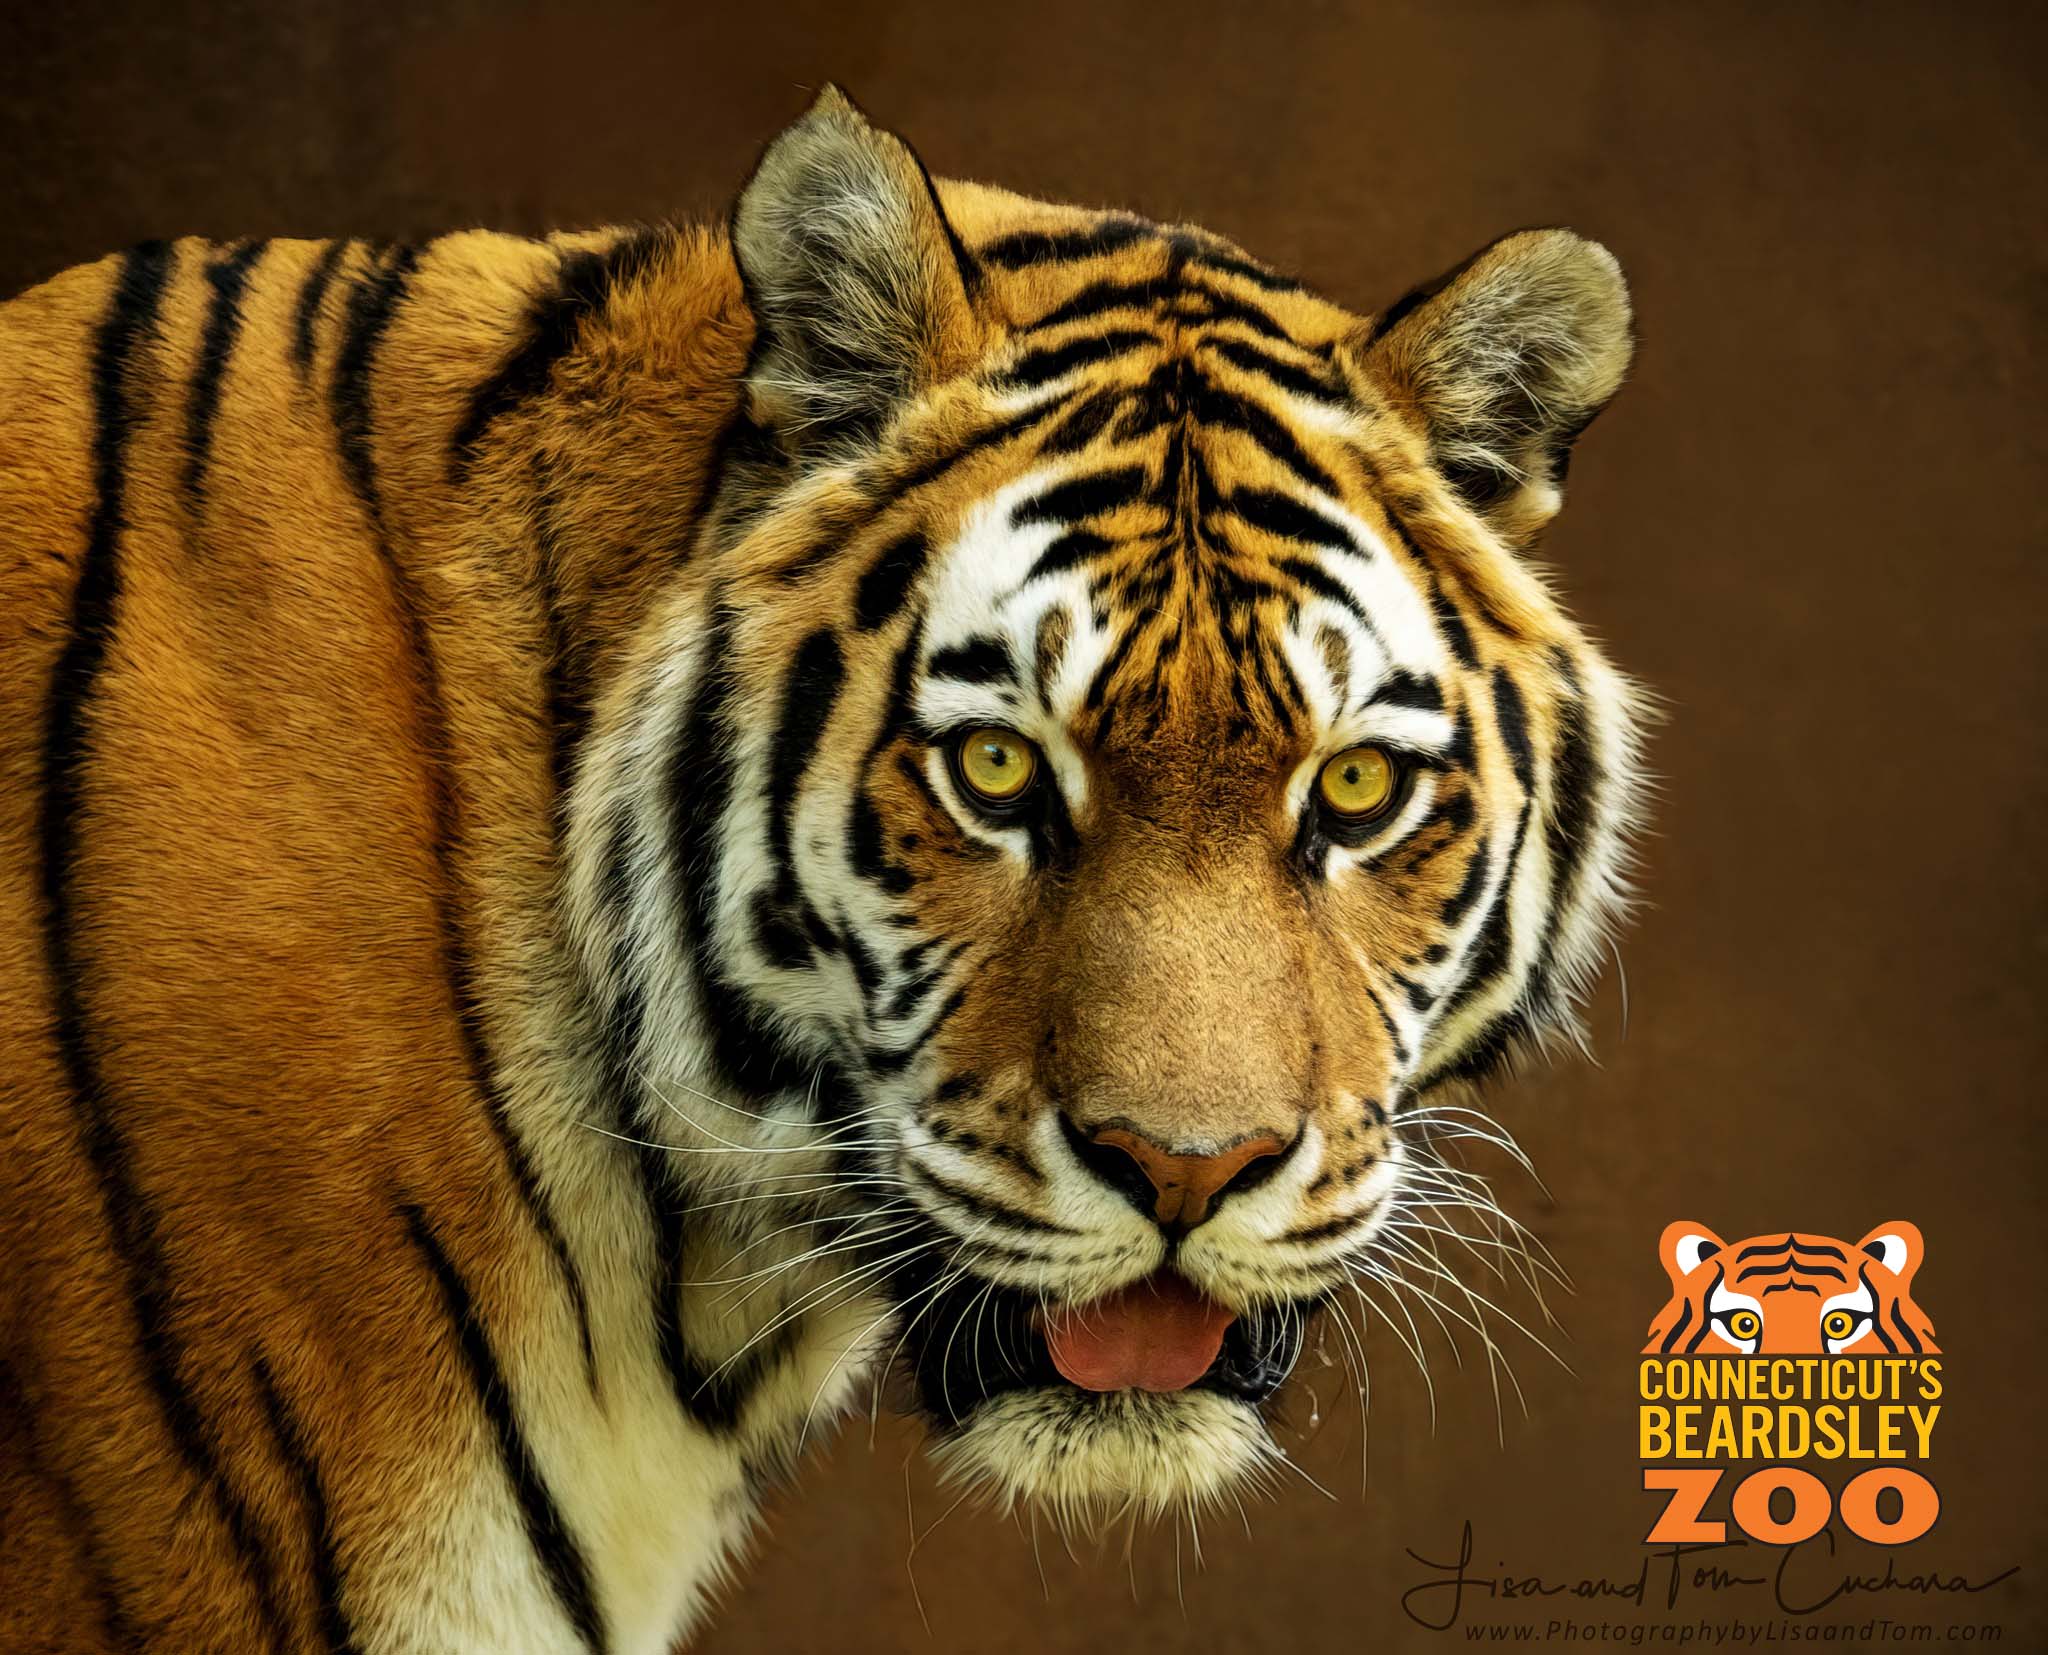 Tiger is facing the viewer with mouth open tongue out